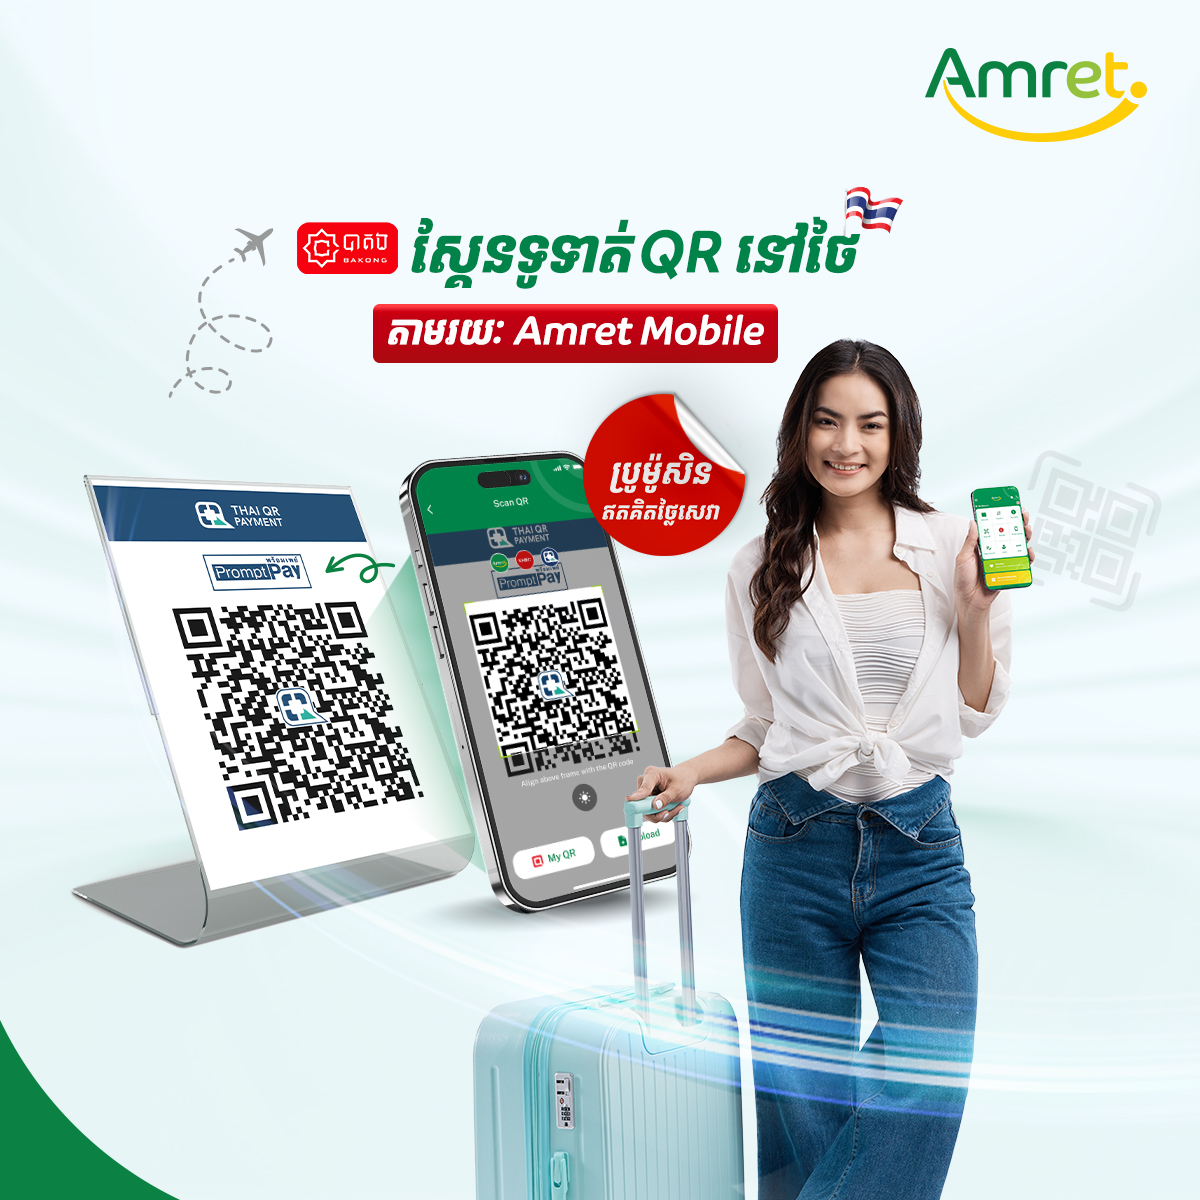 Amret officially launches cross-border payment scanning service between Cambodia and Thailand through Amret Mobile